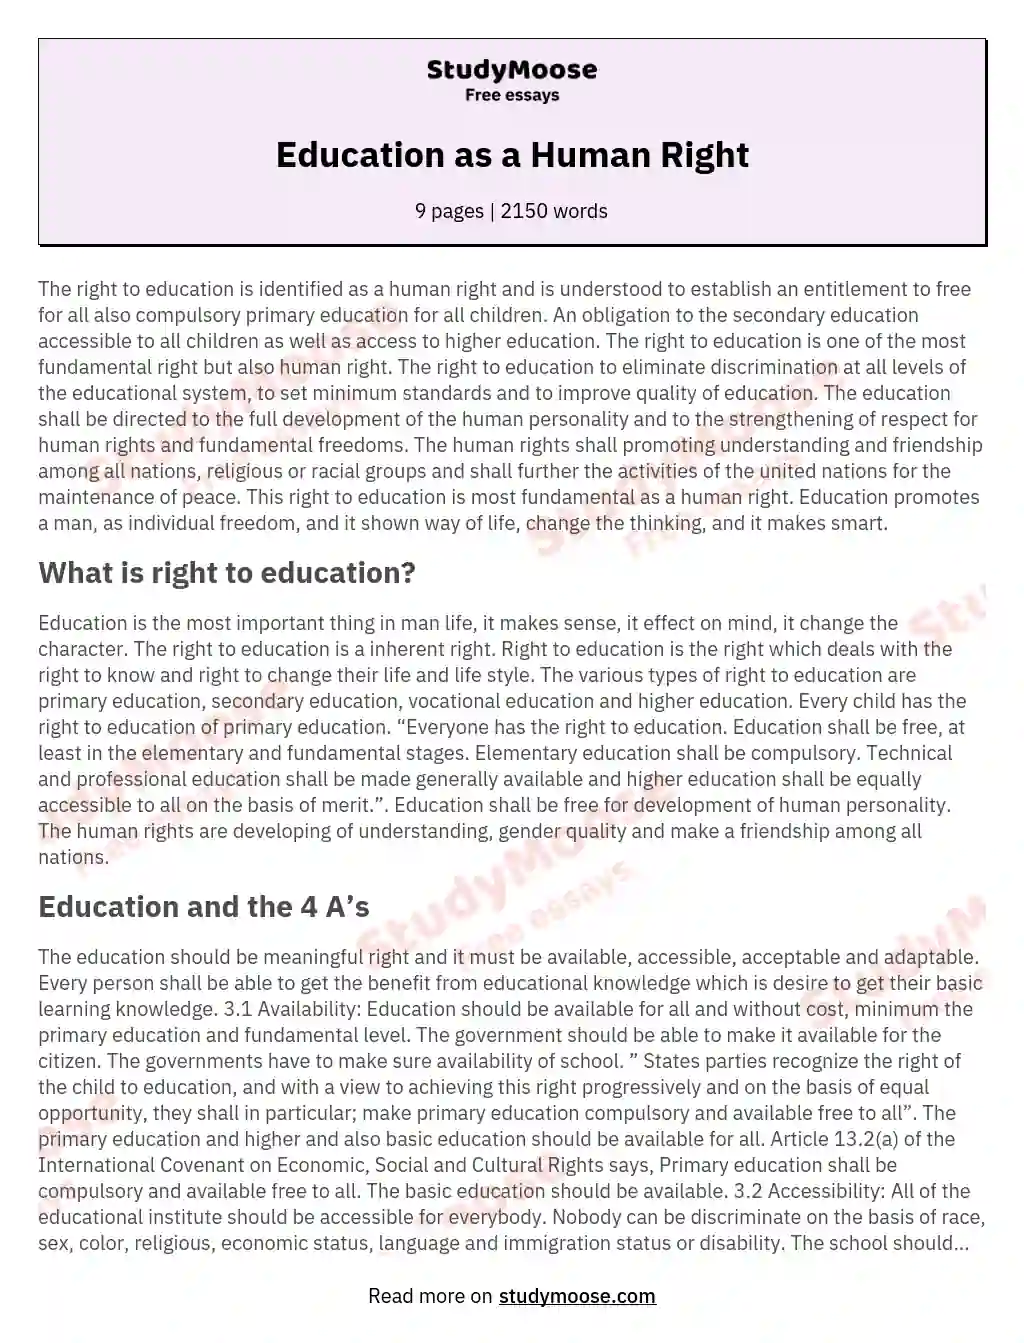 Education as a Human Right essay